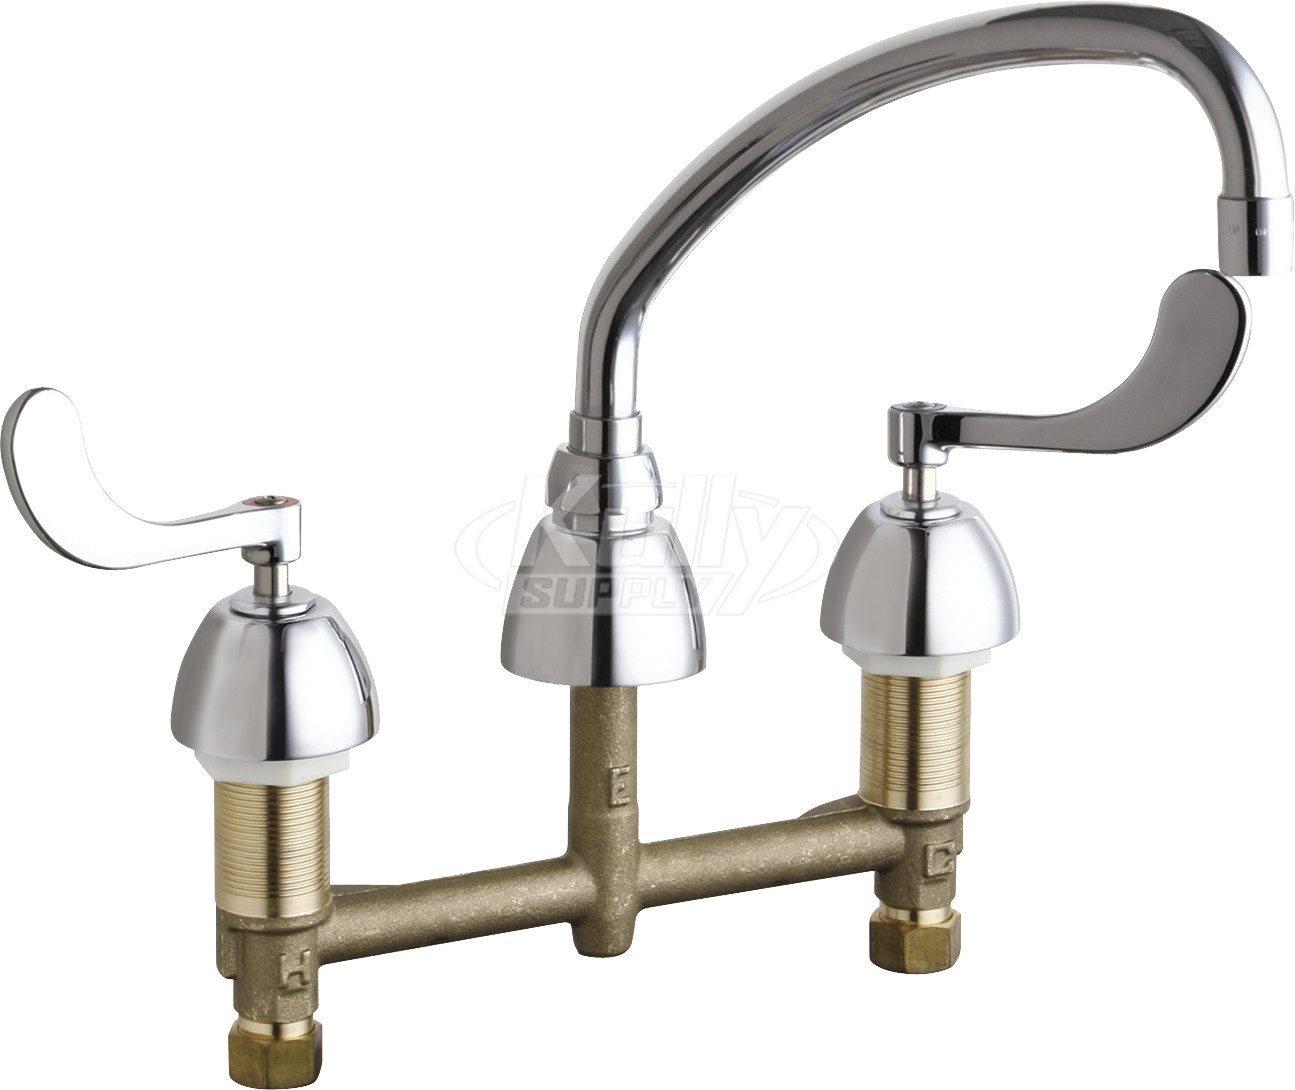 Chicago 786-L9E36ABCP Concealed Hot and Cold Water Sink Faucet